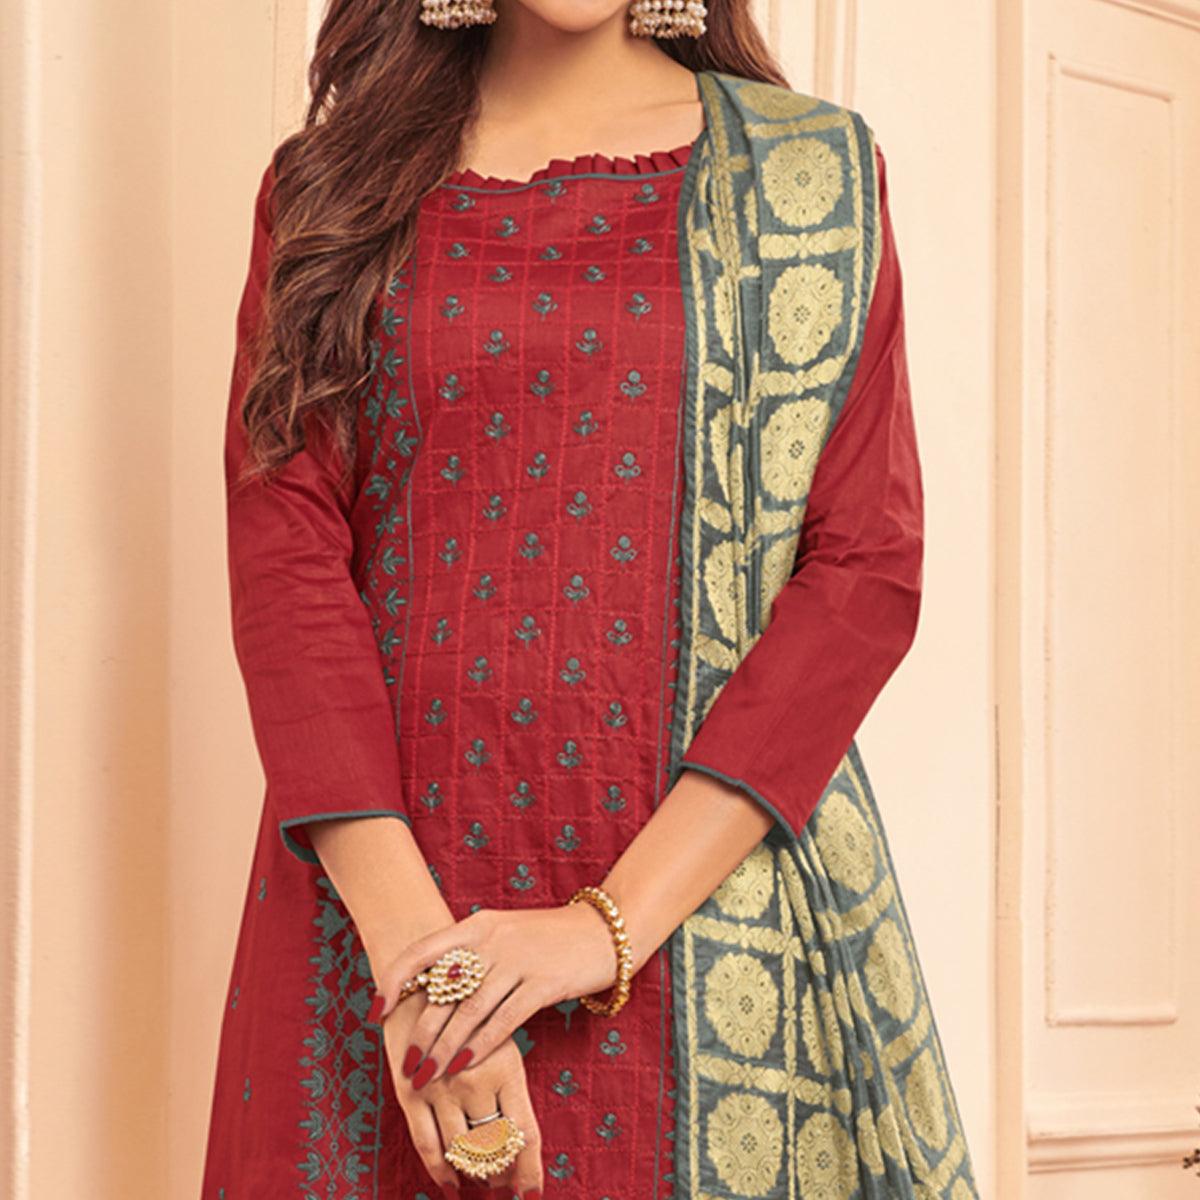 Charming Maroon Colored Casual Wear Embroidered Cotton Dress Material With Banarasi Silk Dupatta - Peachmode